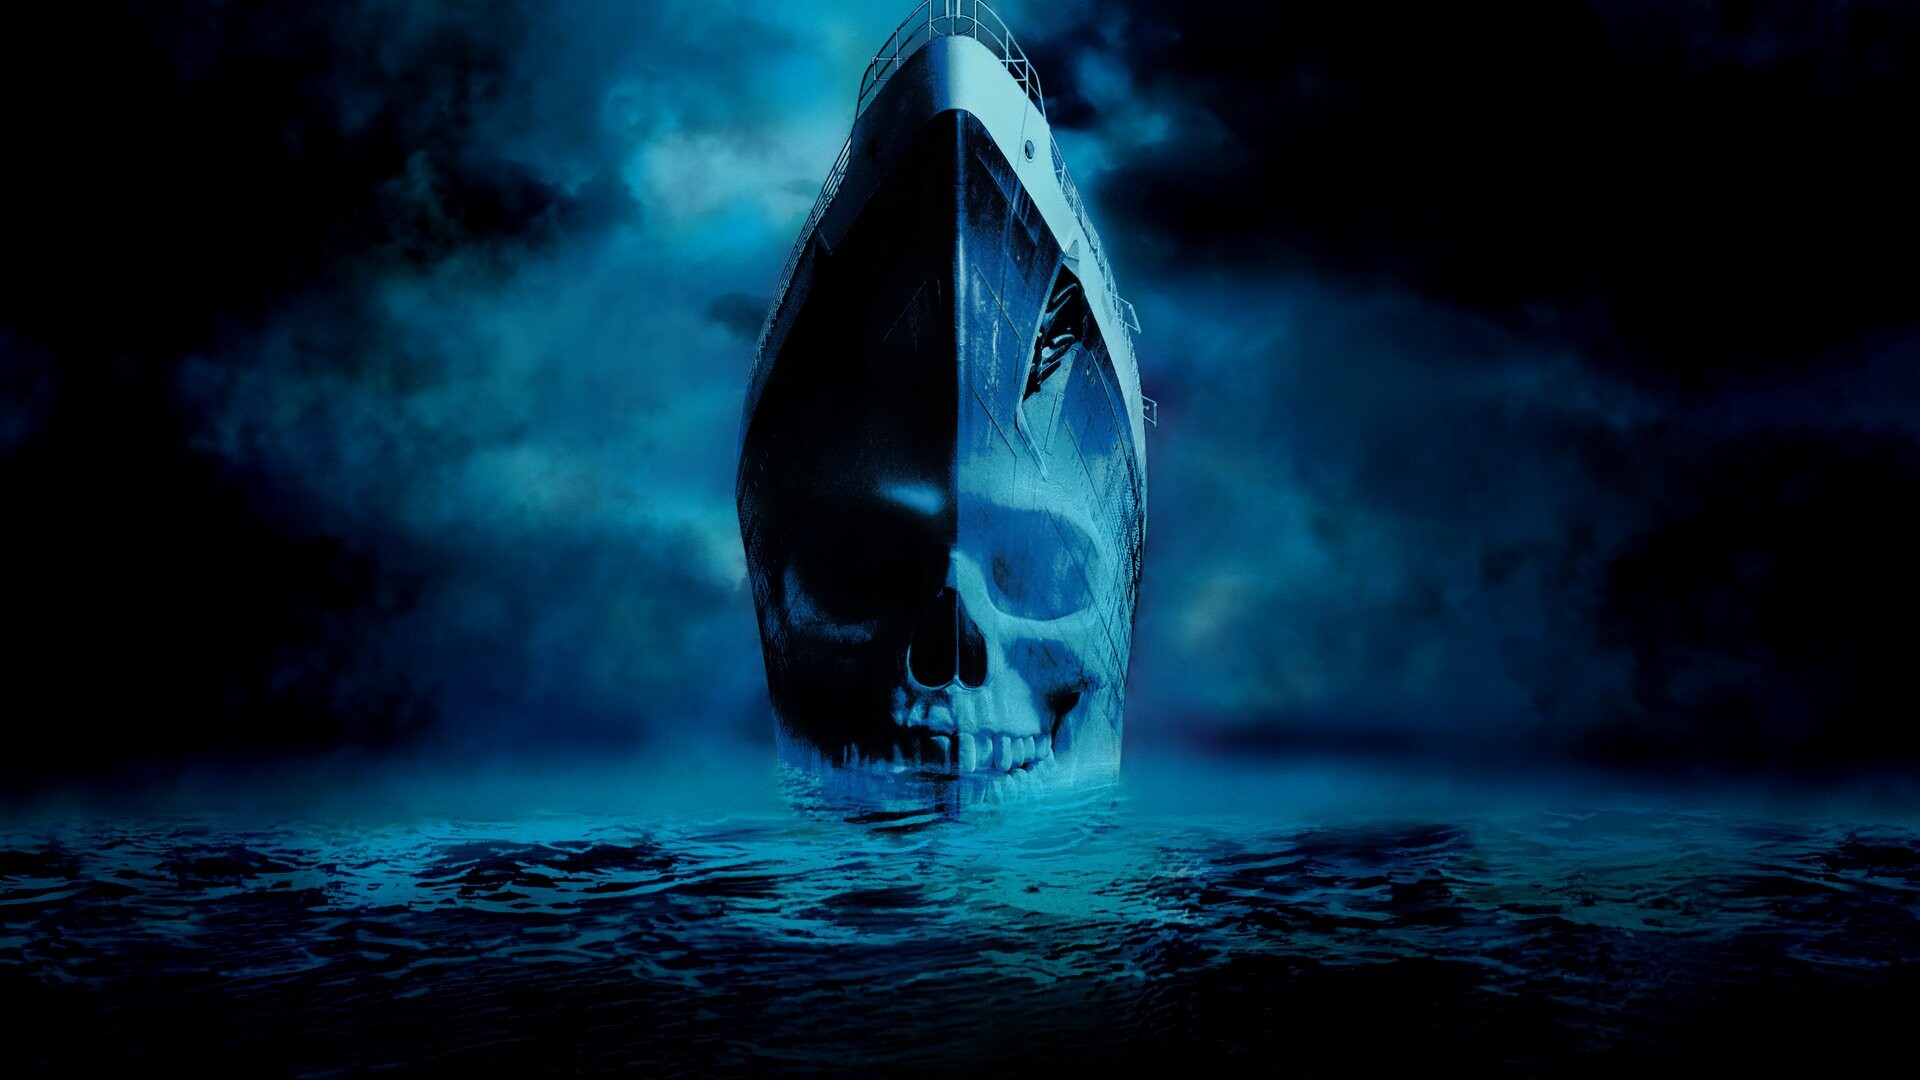 Ghost Ship: The film is set on a mysterious ocean liner that disappeared in 1962. 1920x1080 Full HD Wallpaper.